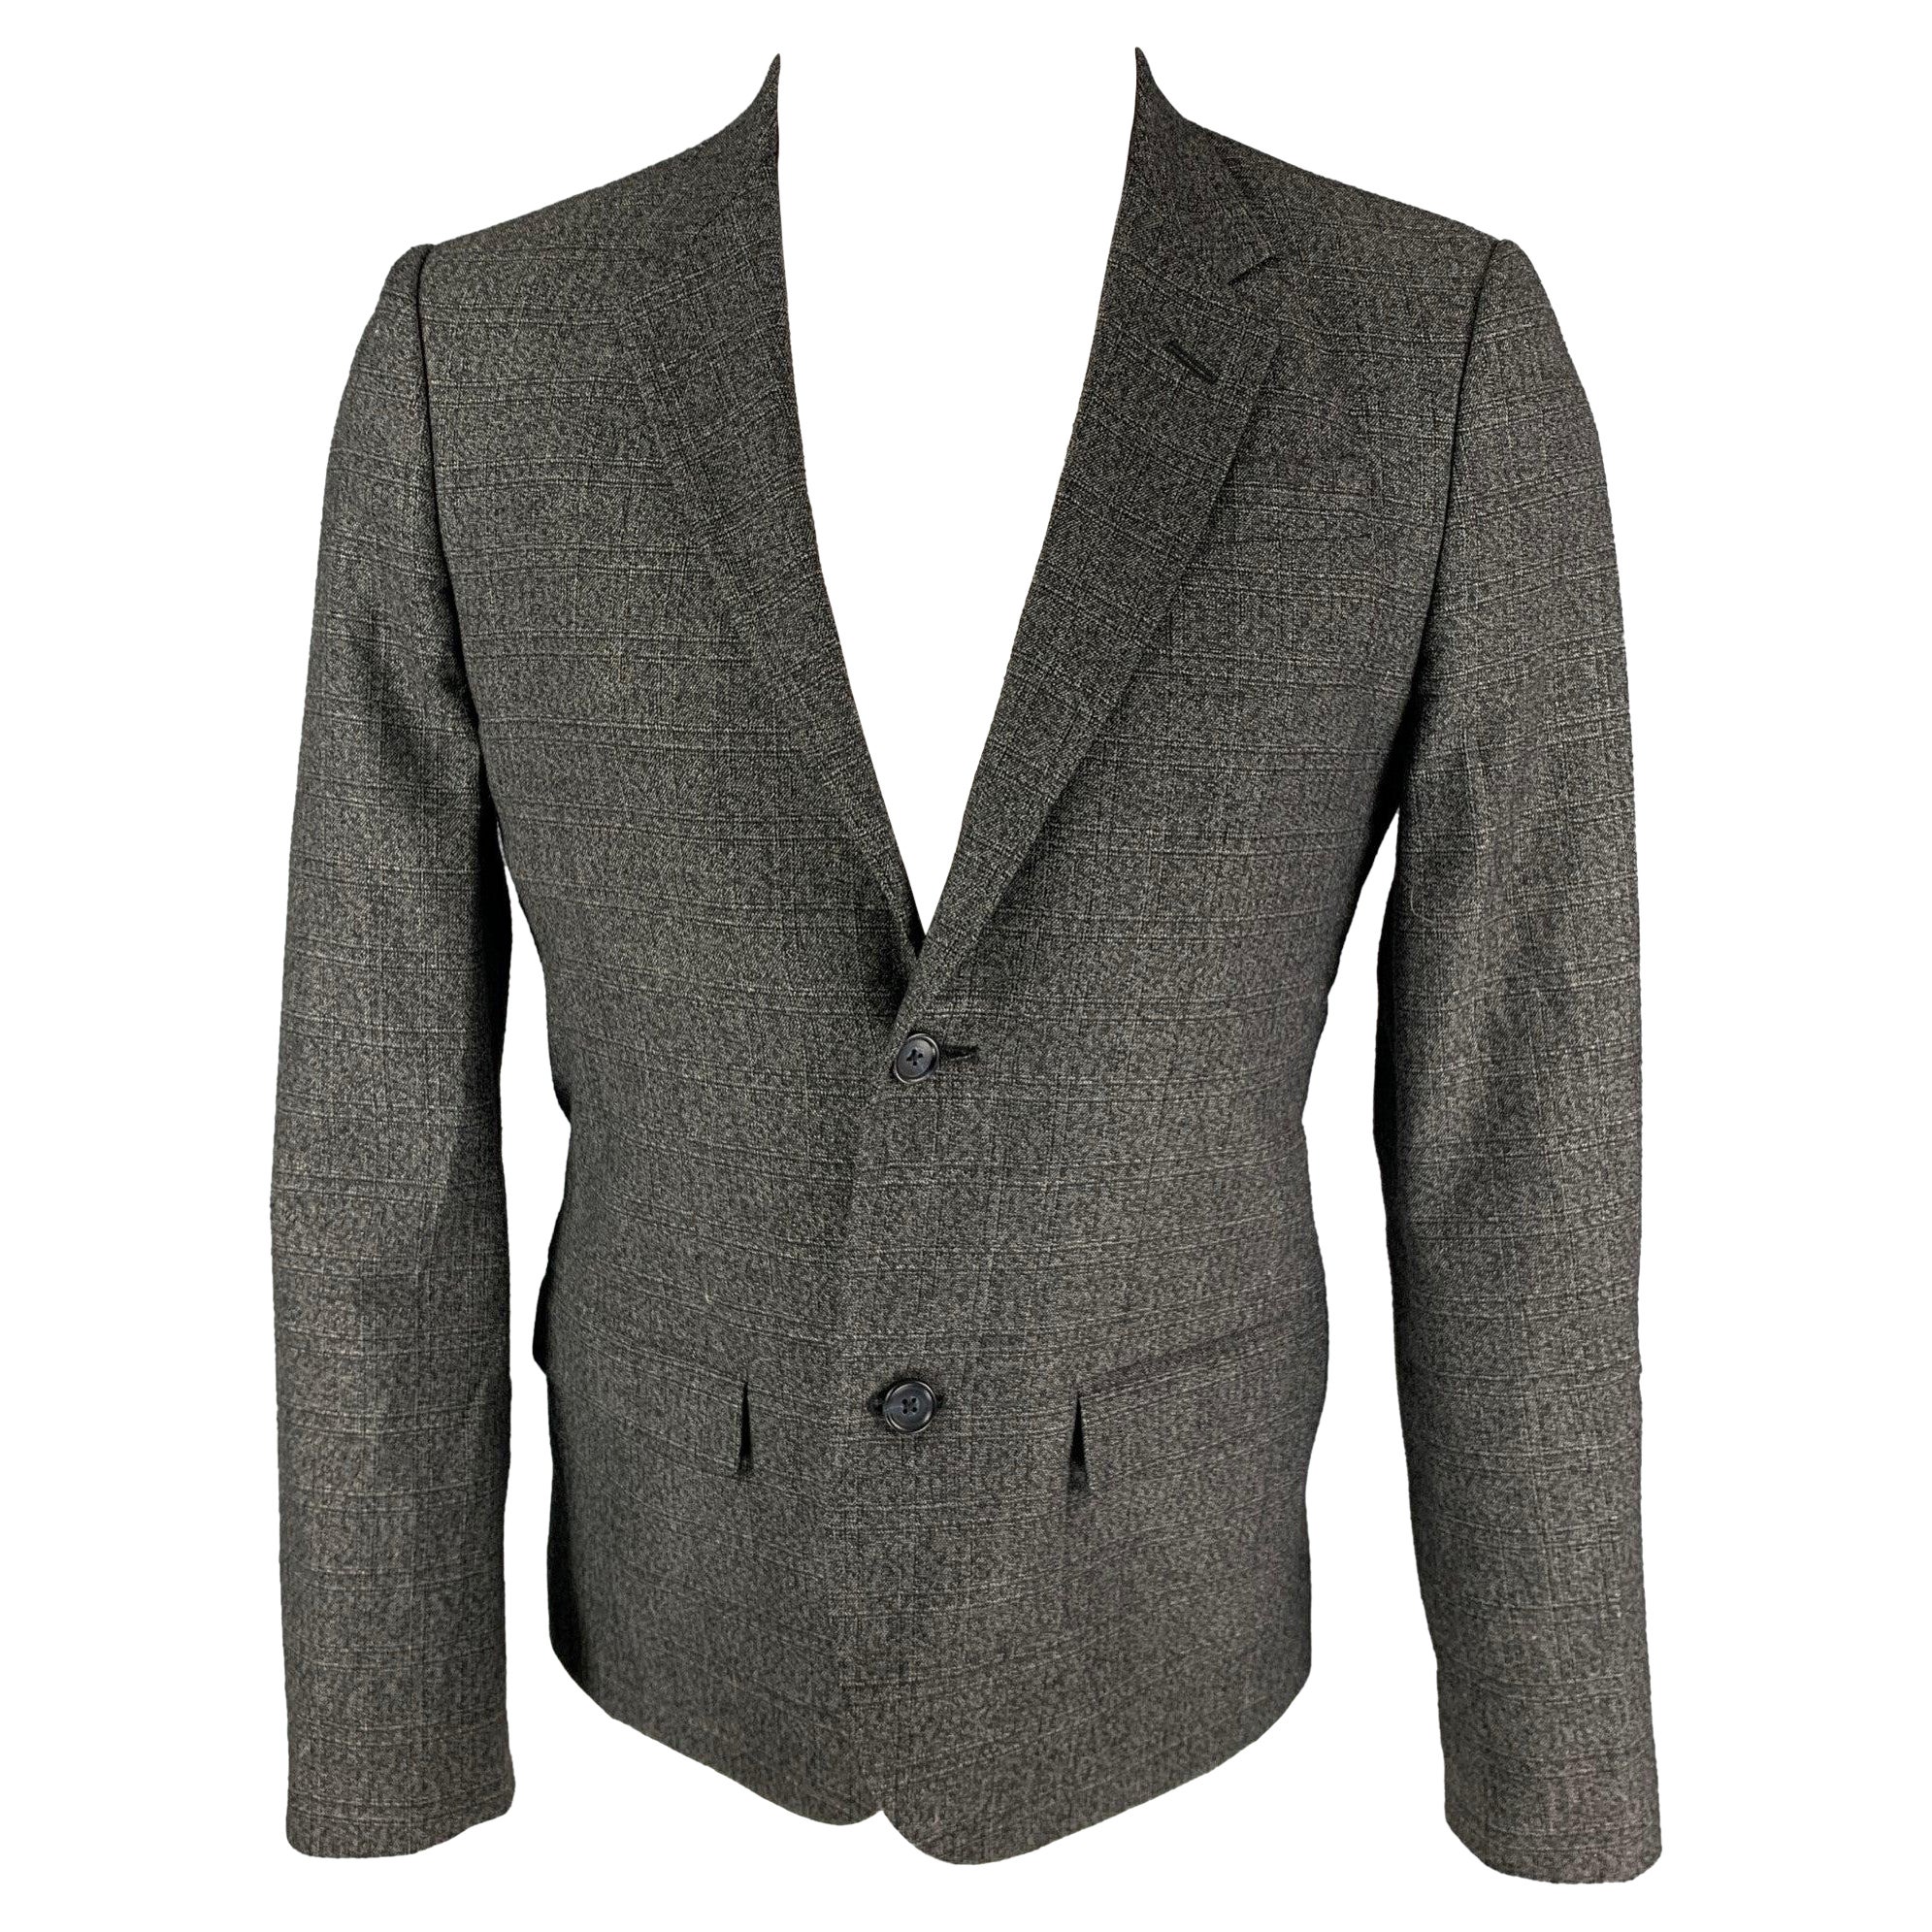 MARC by MARC JACOBS Charcoal Heather Wool Blend Notch Lapel Sport Coat For Sale